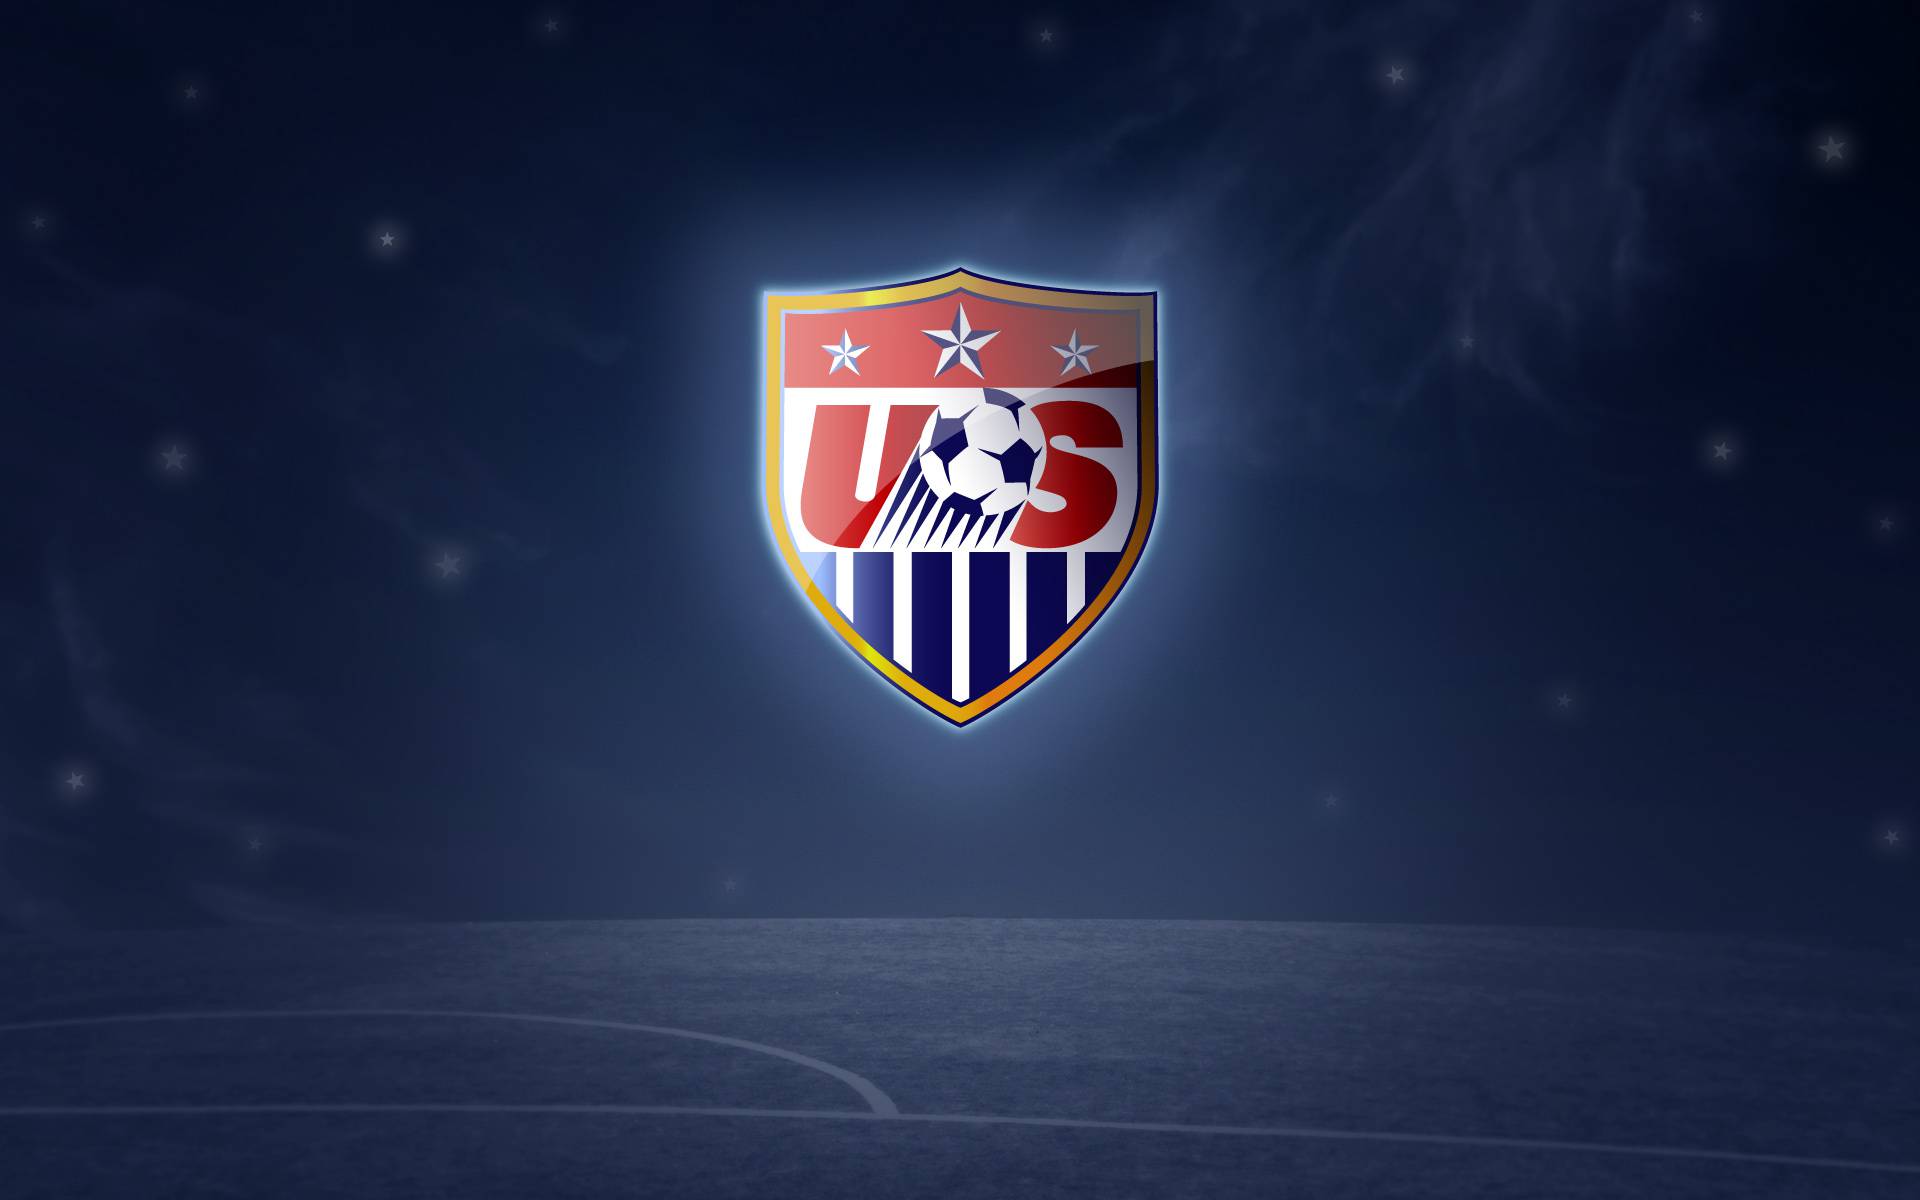 United States Soccer Federation Wallpaper X